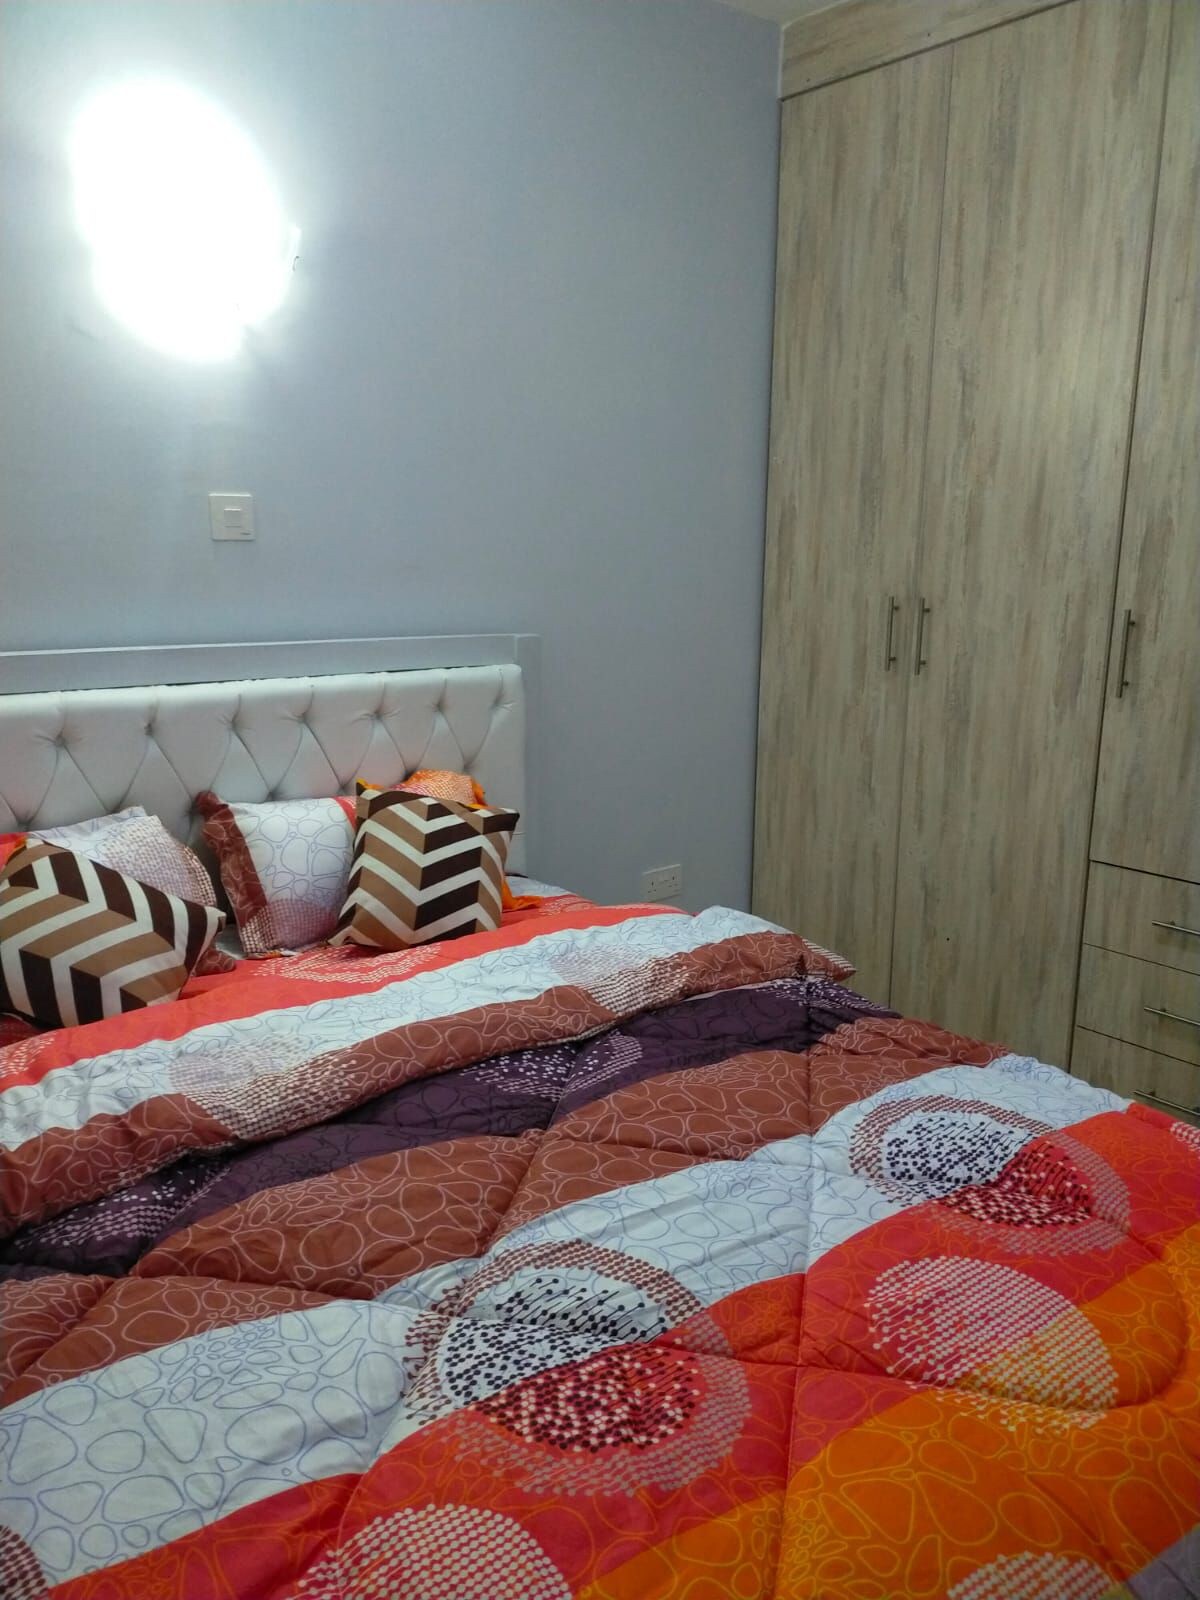 Tulivu Homes one bedroom airbnb